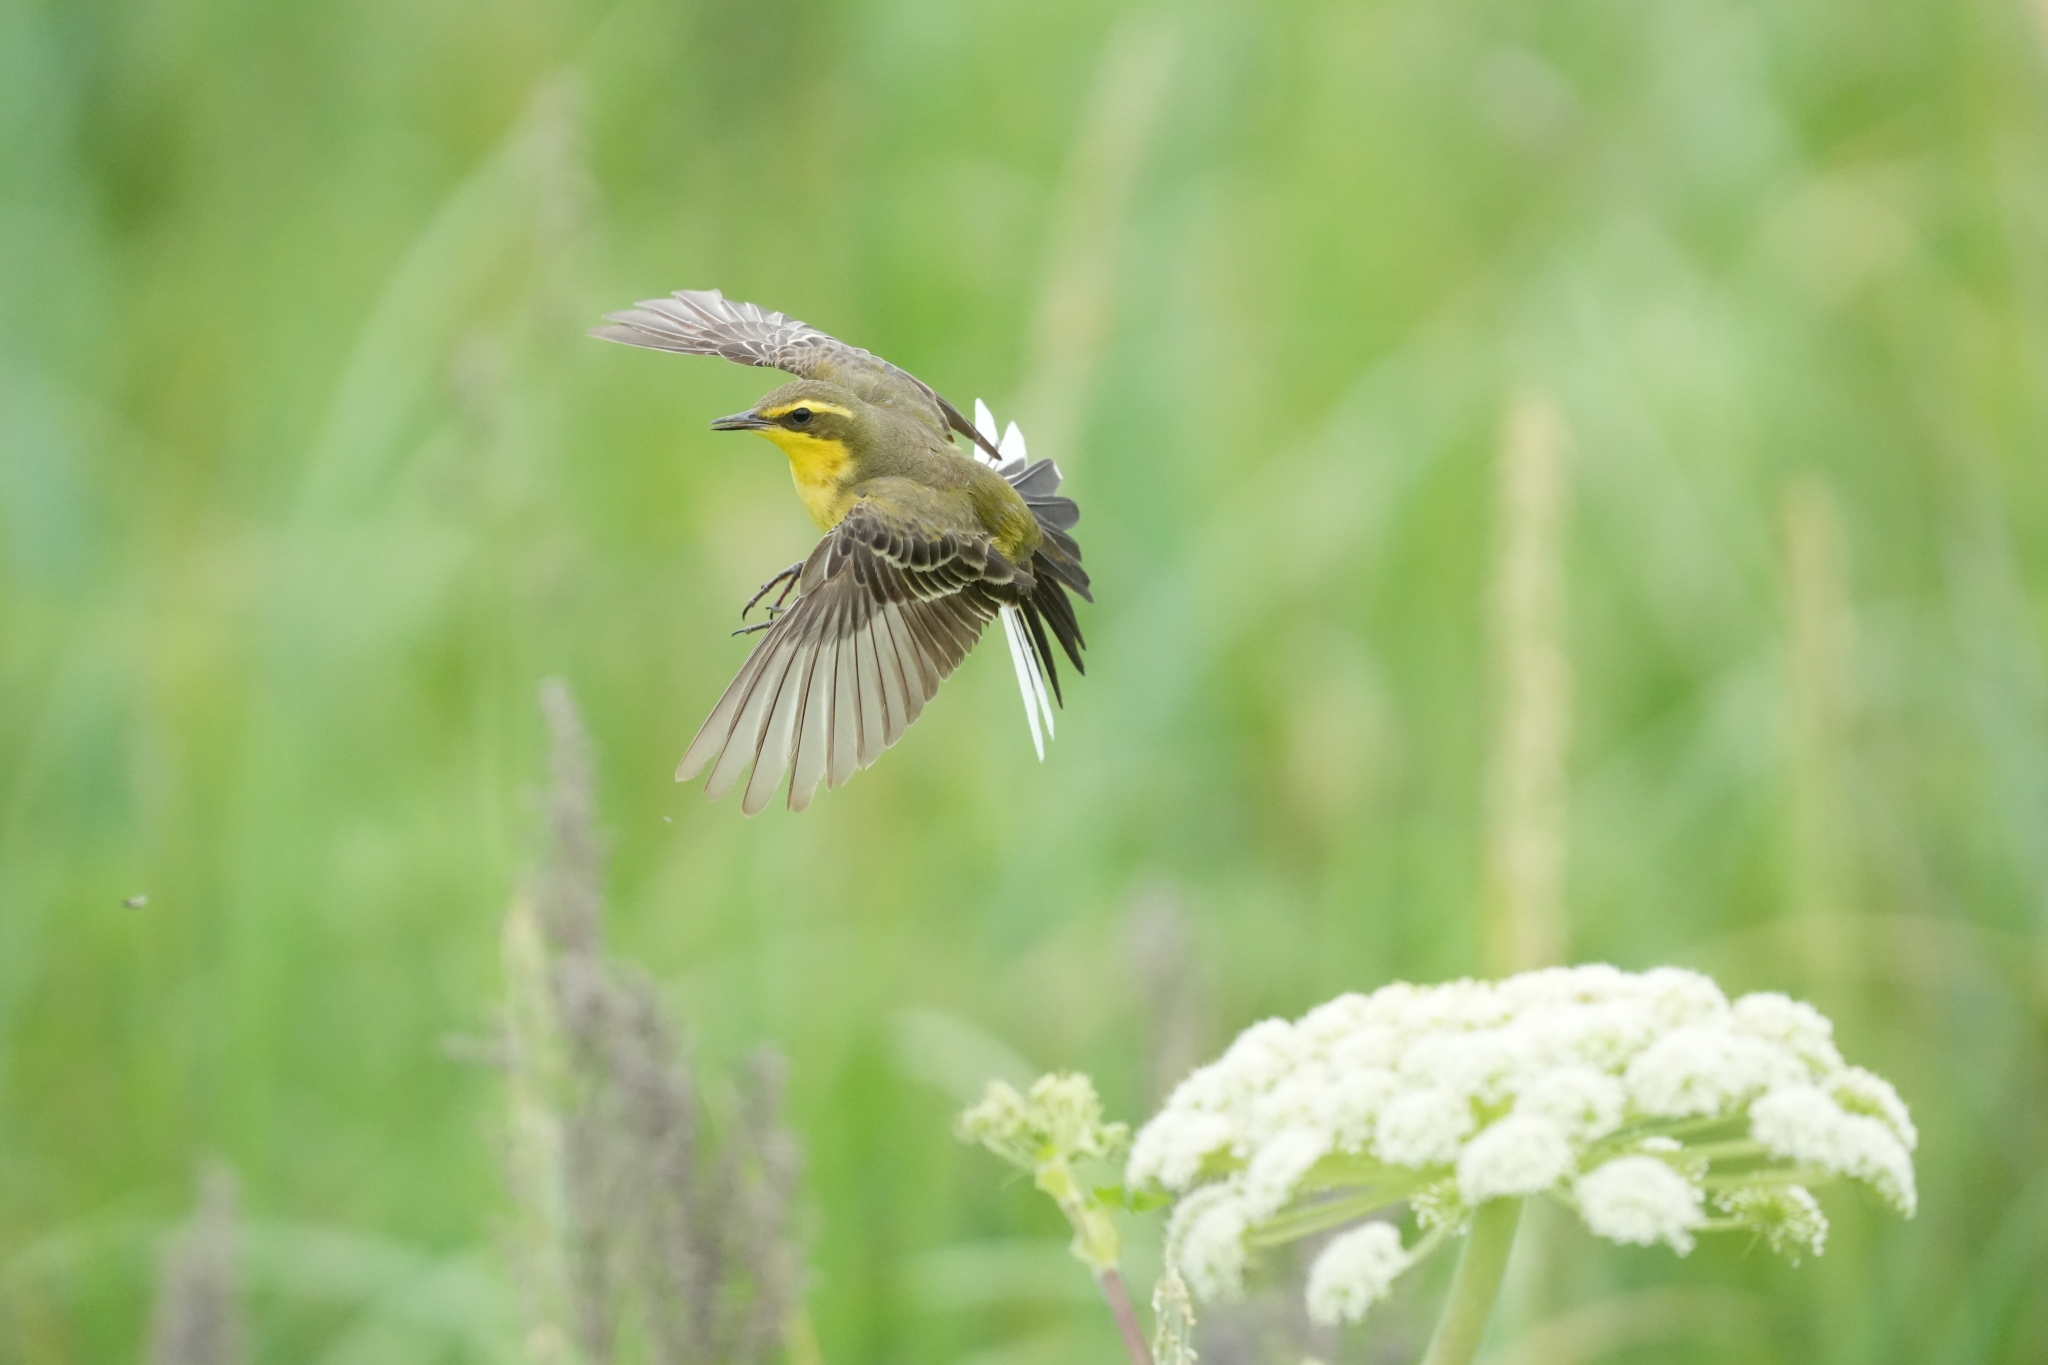 Small bird in flight with grass in a bokeh background